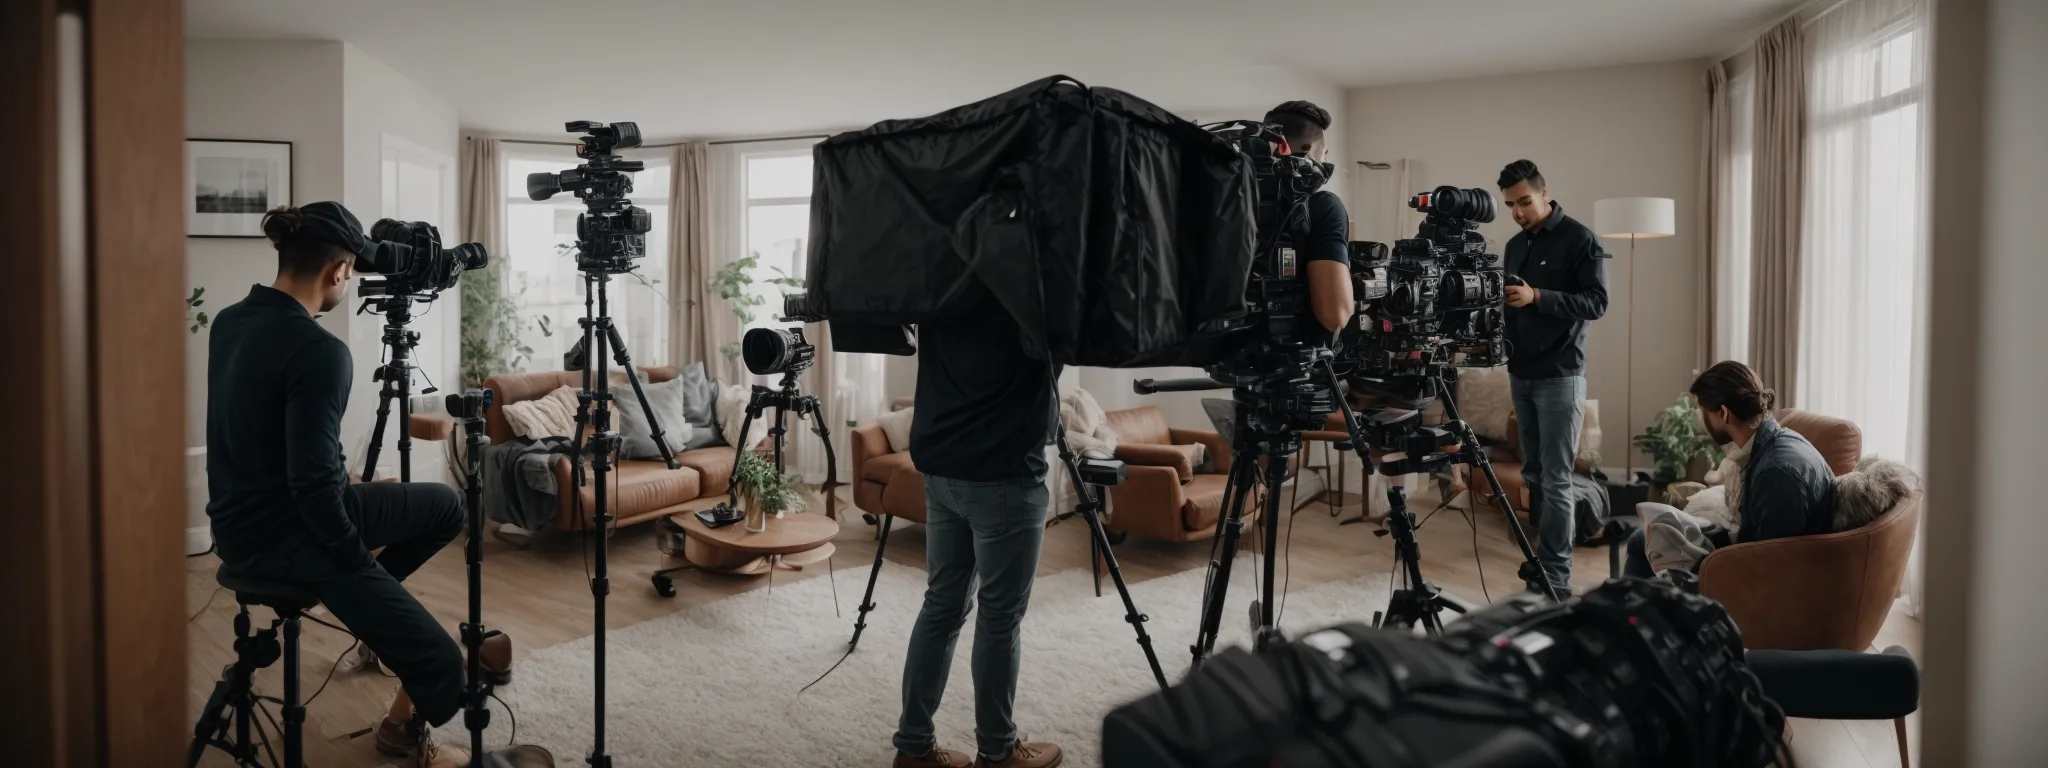 a production team setting up professional filming equipment inside a modern living room for a high-quality video shoot.